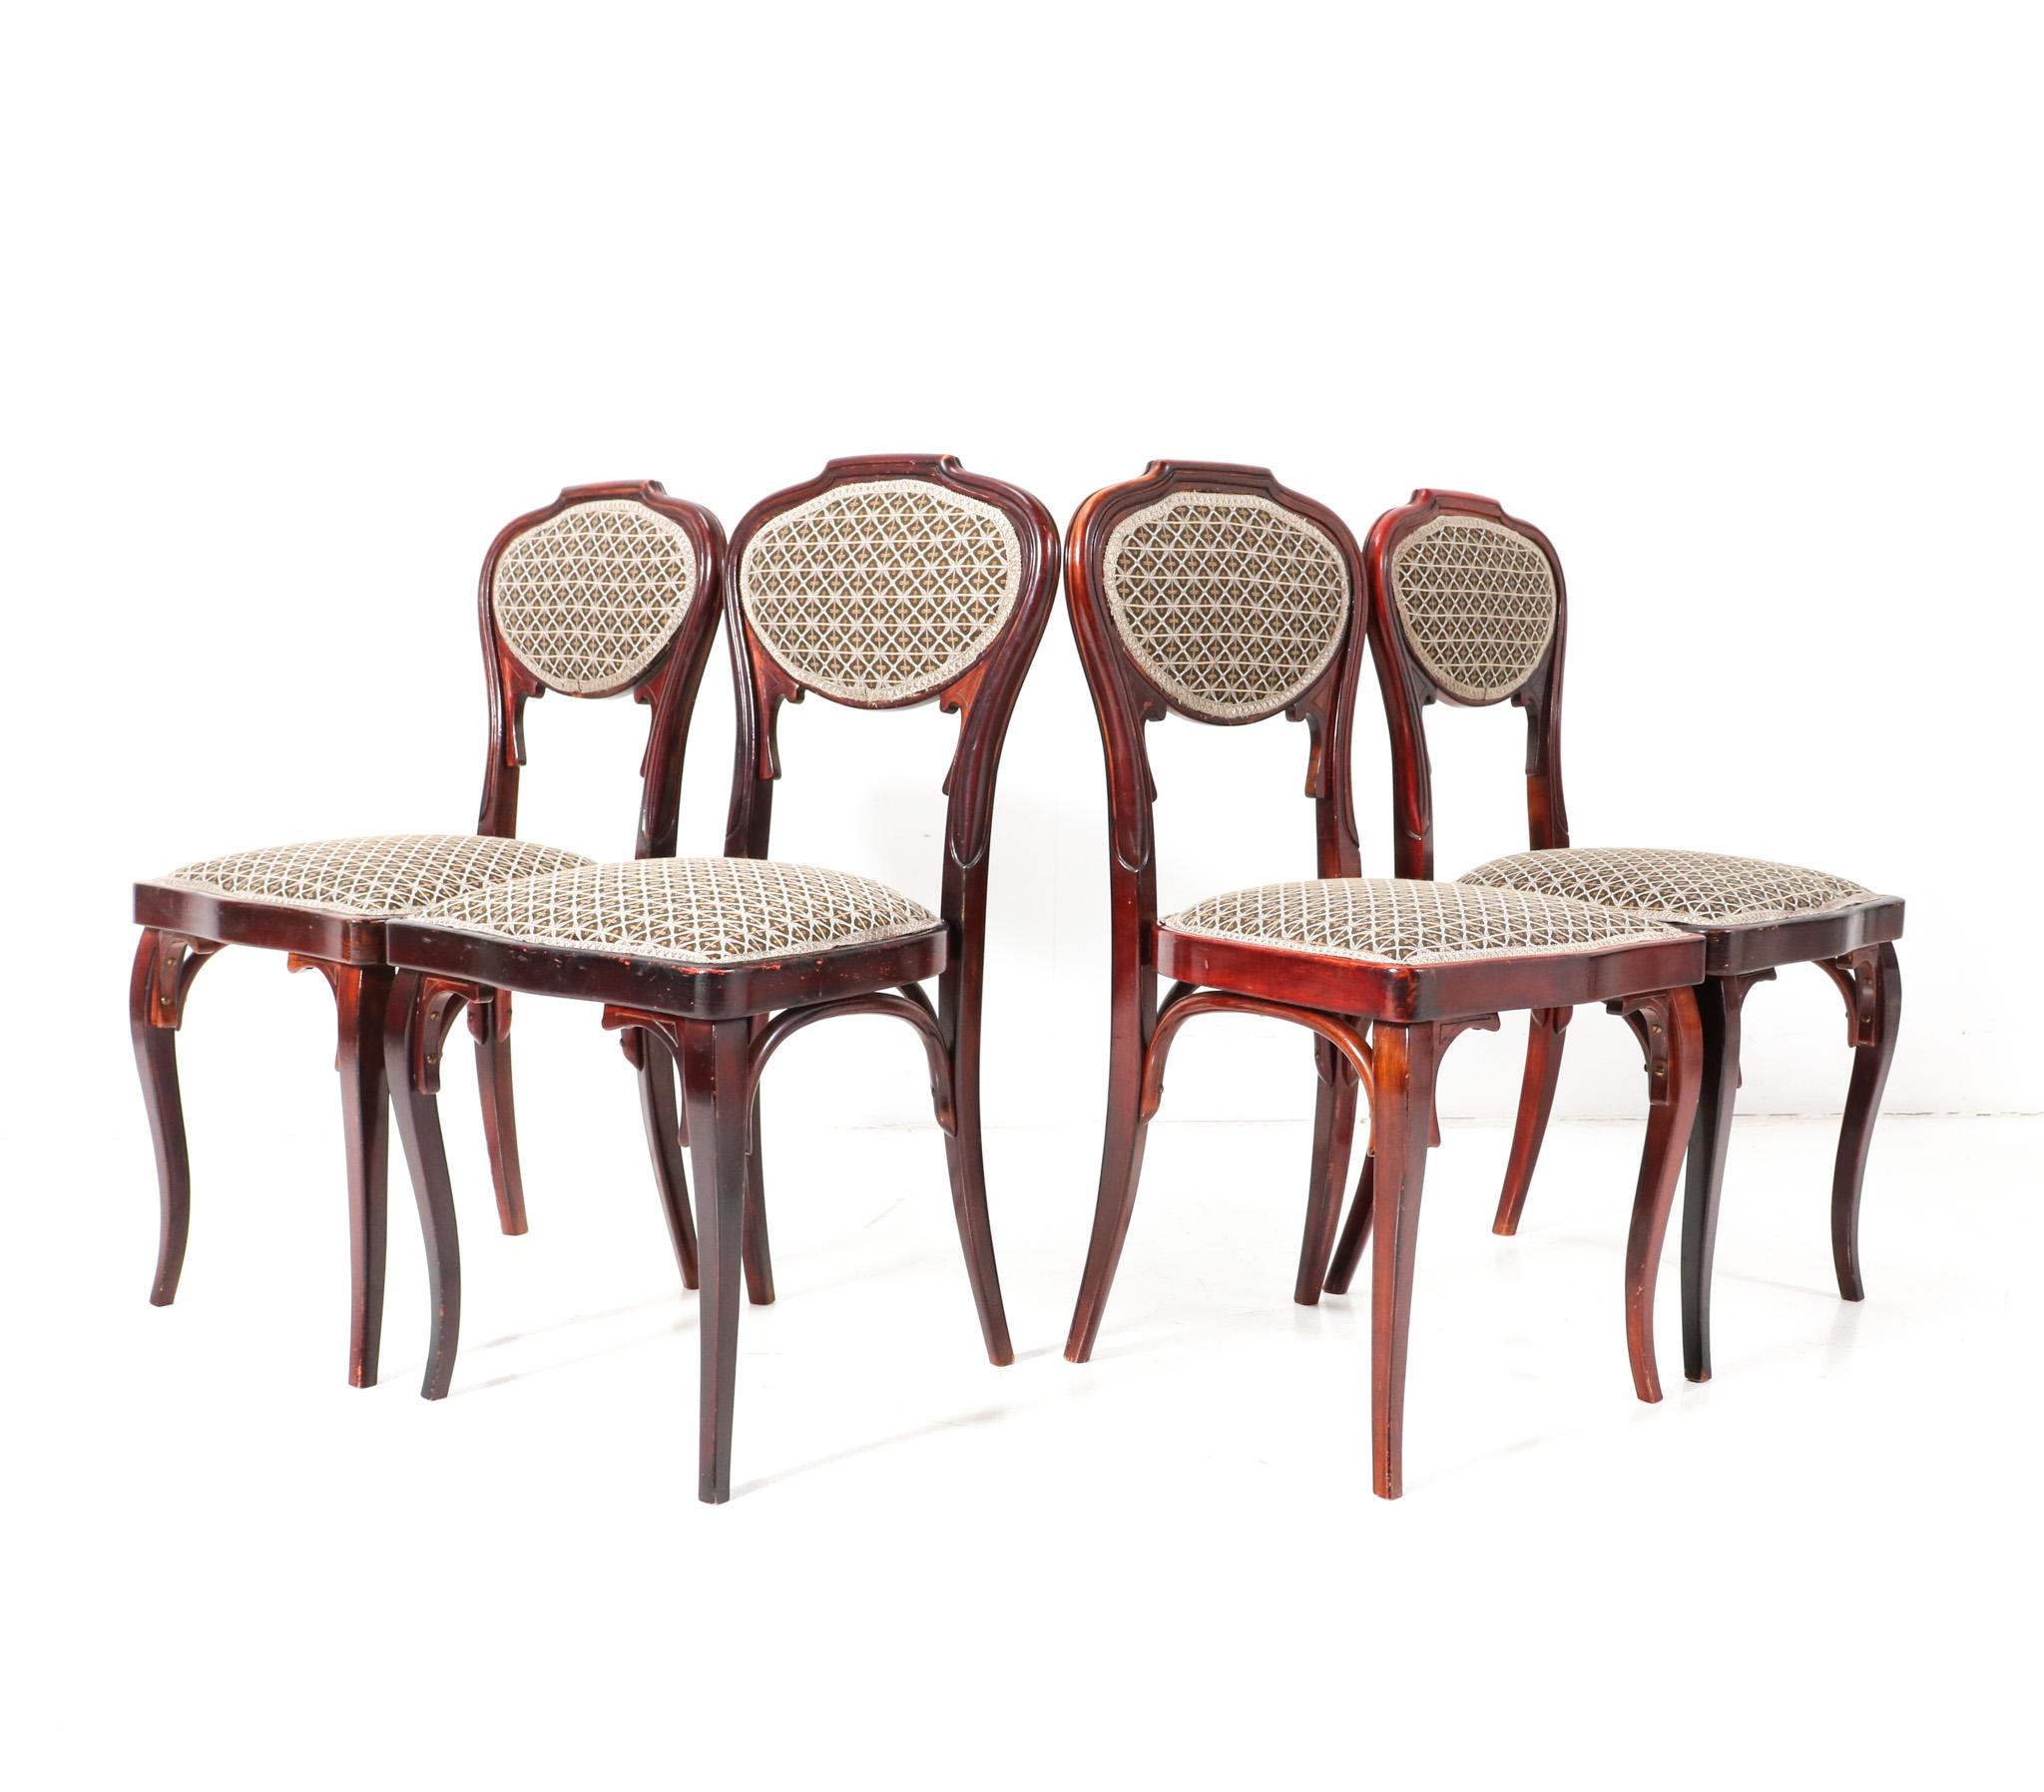 Magnificent and rare set of four Vienna Secession side chairs.
Design by Jacob and Josef Kohn.
Striking Austrian design from the 1900s.
Original lacquered beech and bentwood curved frames.
Re-upholstered with Backhausen new fabric.
Re-upholstered